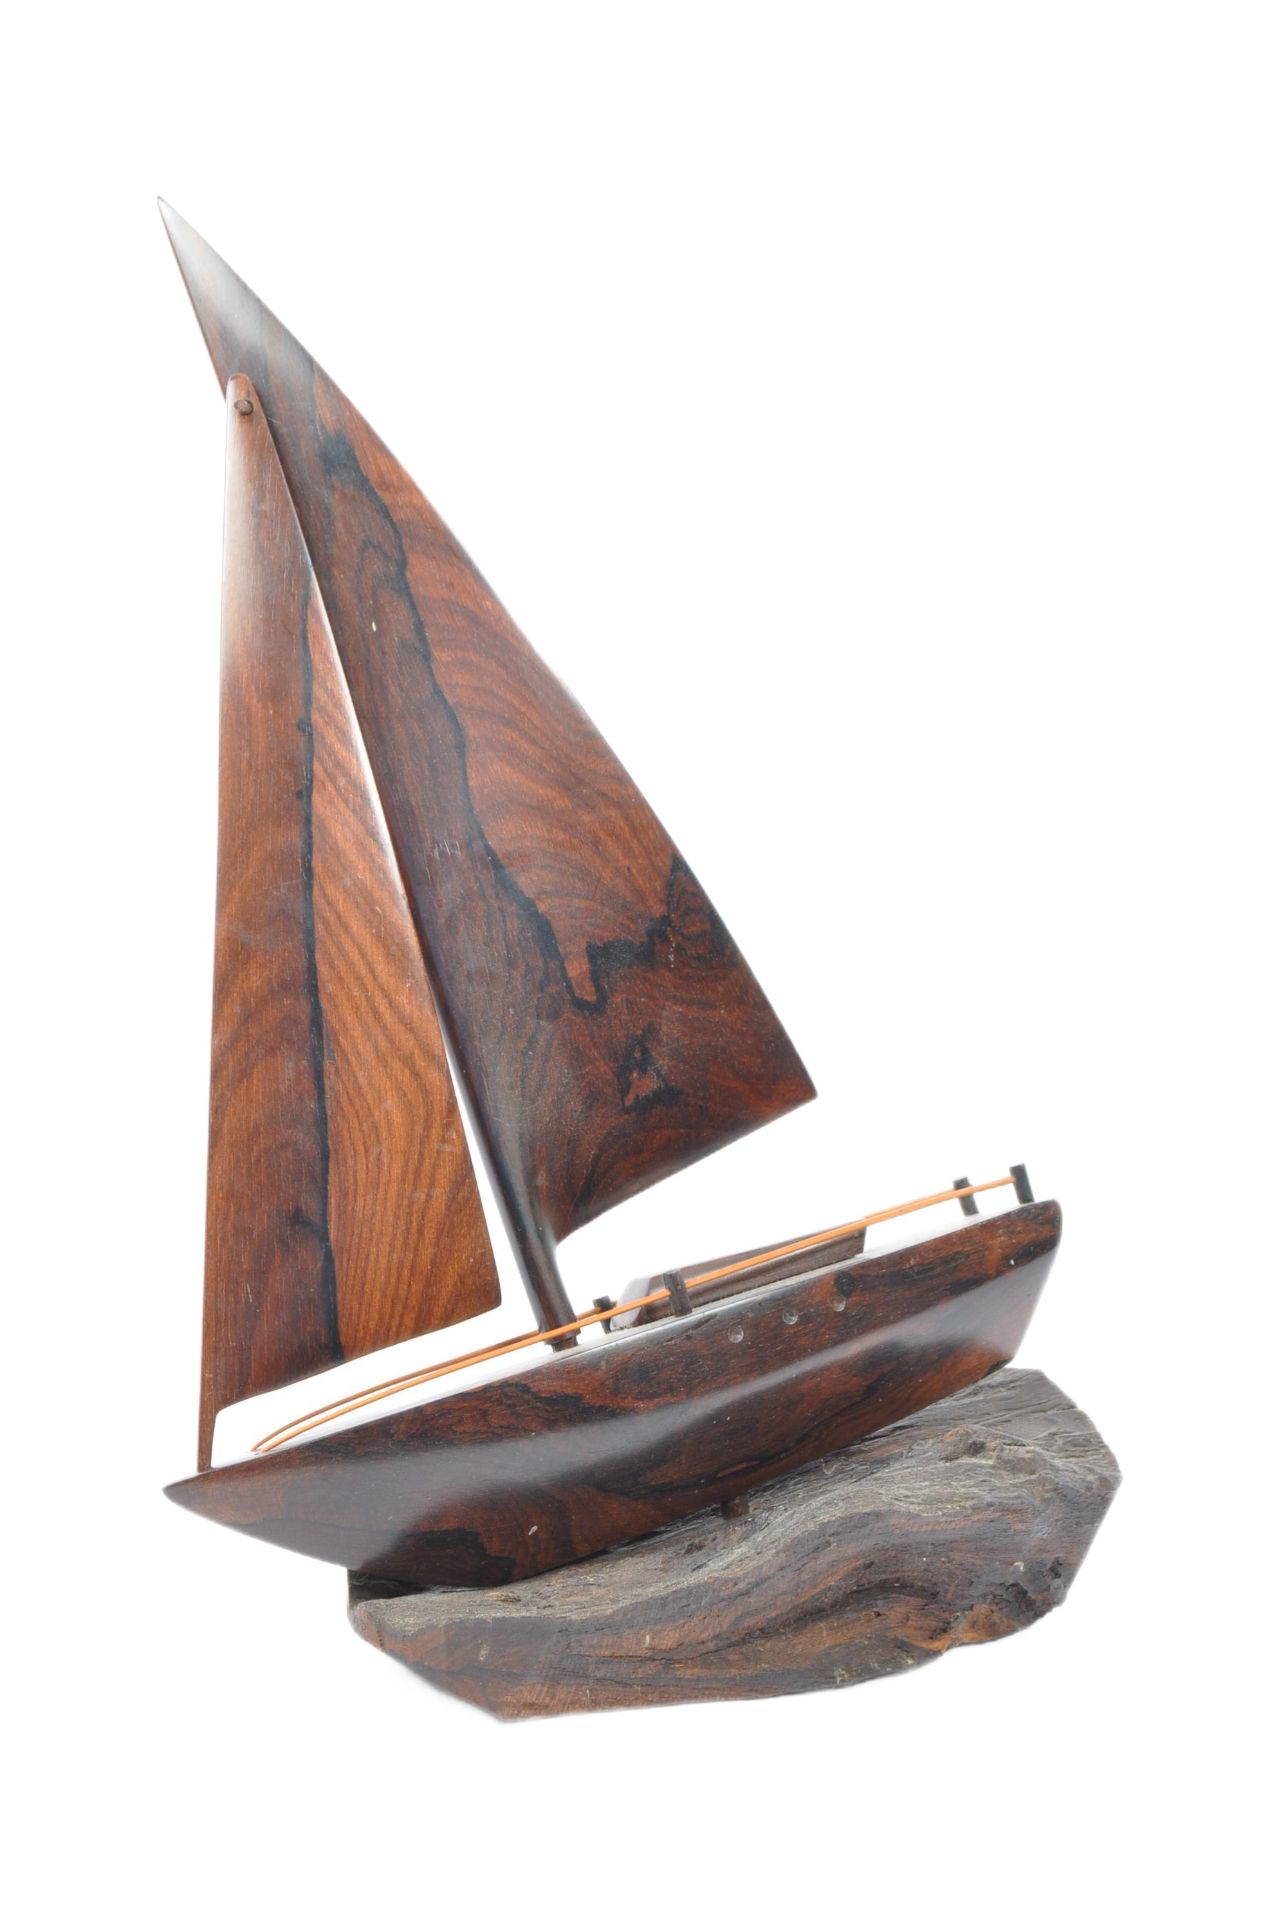 ART DECO STYLE CARVED HARDWOOD MODEL OF A YACHT